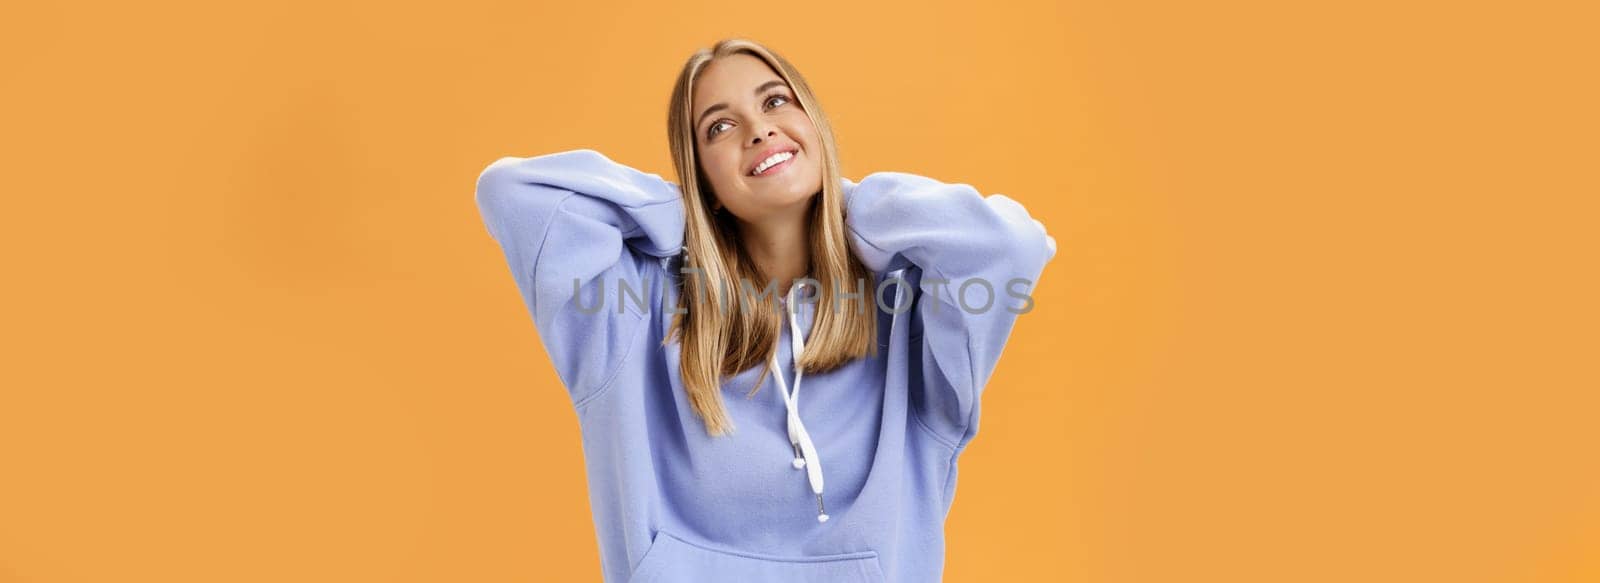 Young pleased and tender woman with tanned skin feeling cozy in warm in trendy hoodie touching back of neck smiling looking at upper right corner dreamy and delighted against orange background. Lifestyle.